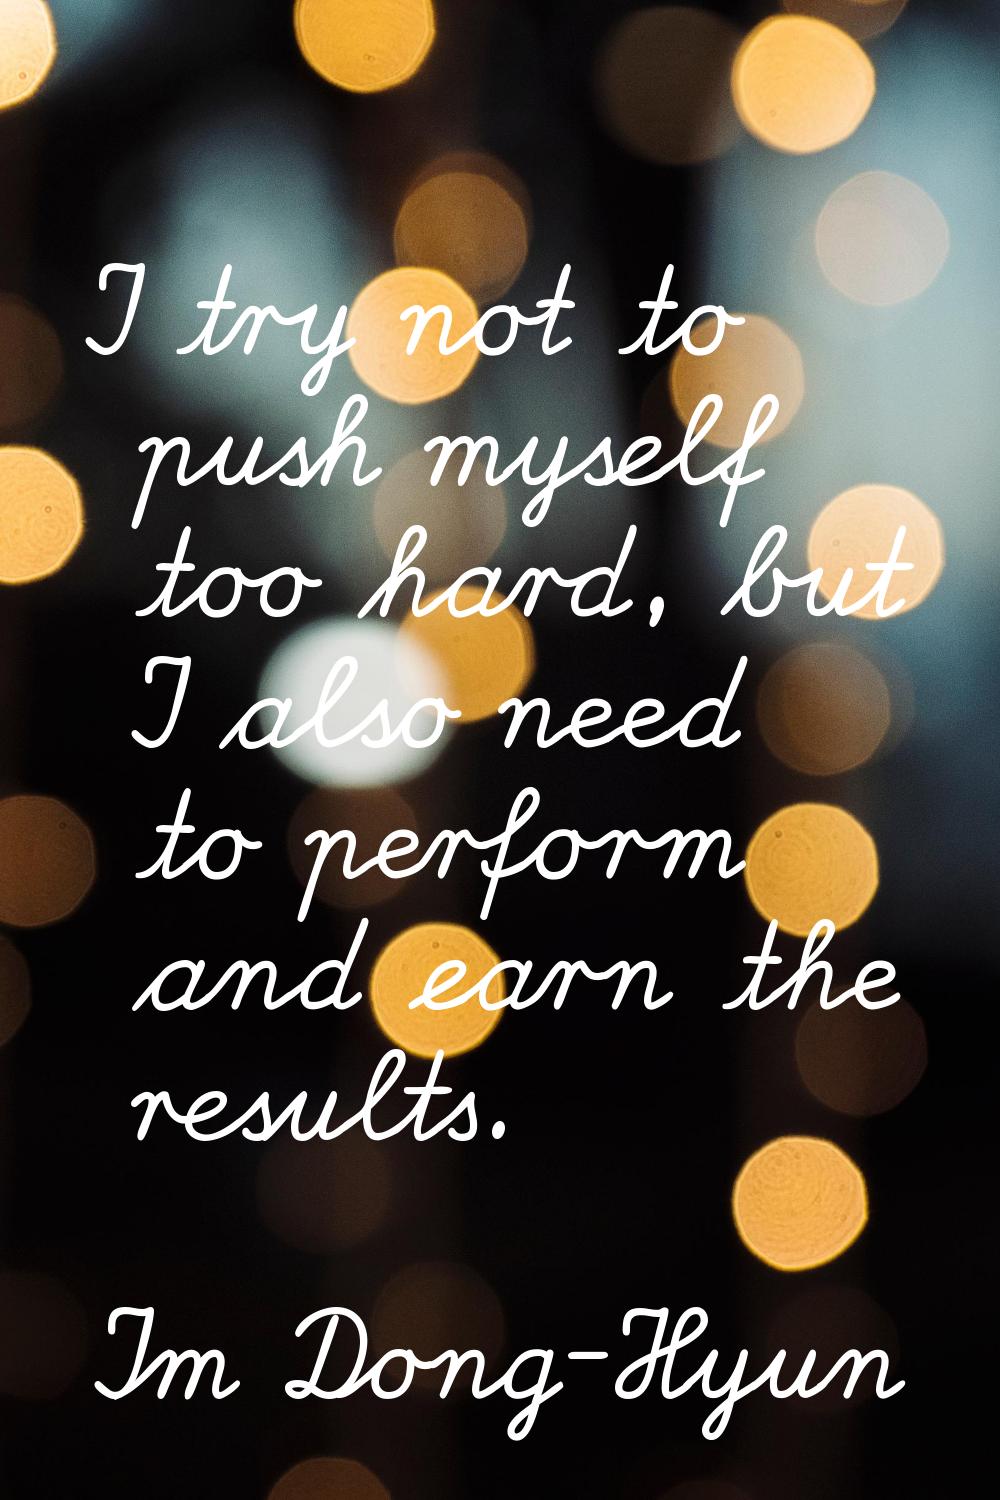 I try not to push myself too hard, but I also need to perform and earn the results.